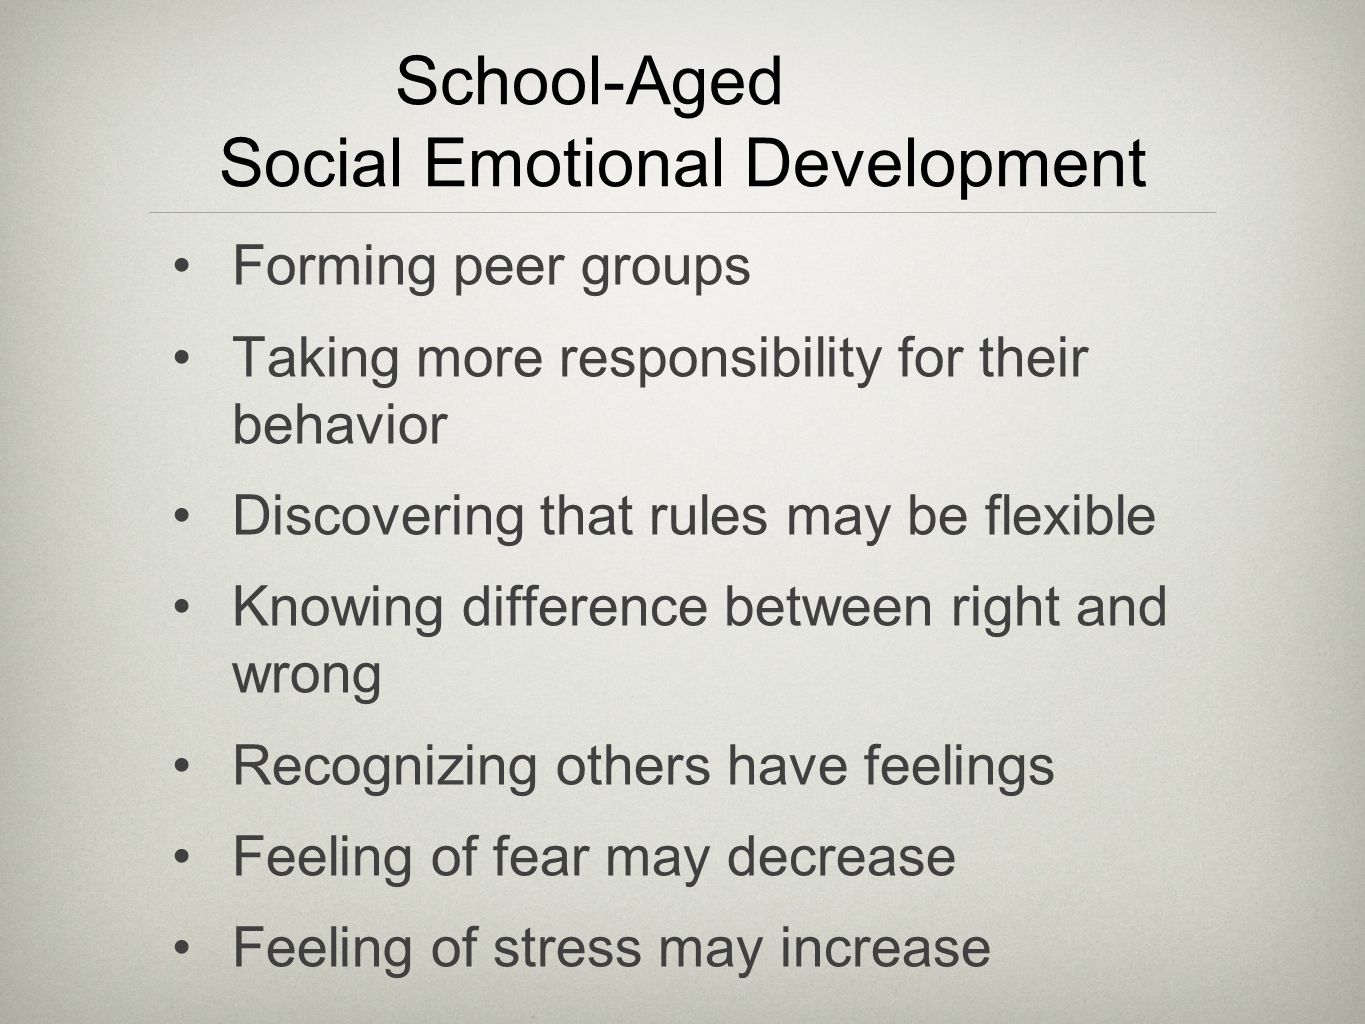 School-Aged Social Emotional Development Forming peer groups Taking more responsibility for their behavior Discovering that rules may be flexible Knowing difference between right and wrong Recognizing others have feelings Feeling of fear may decrease Feeling of stress may increase